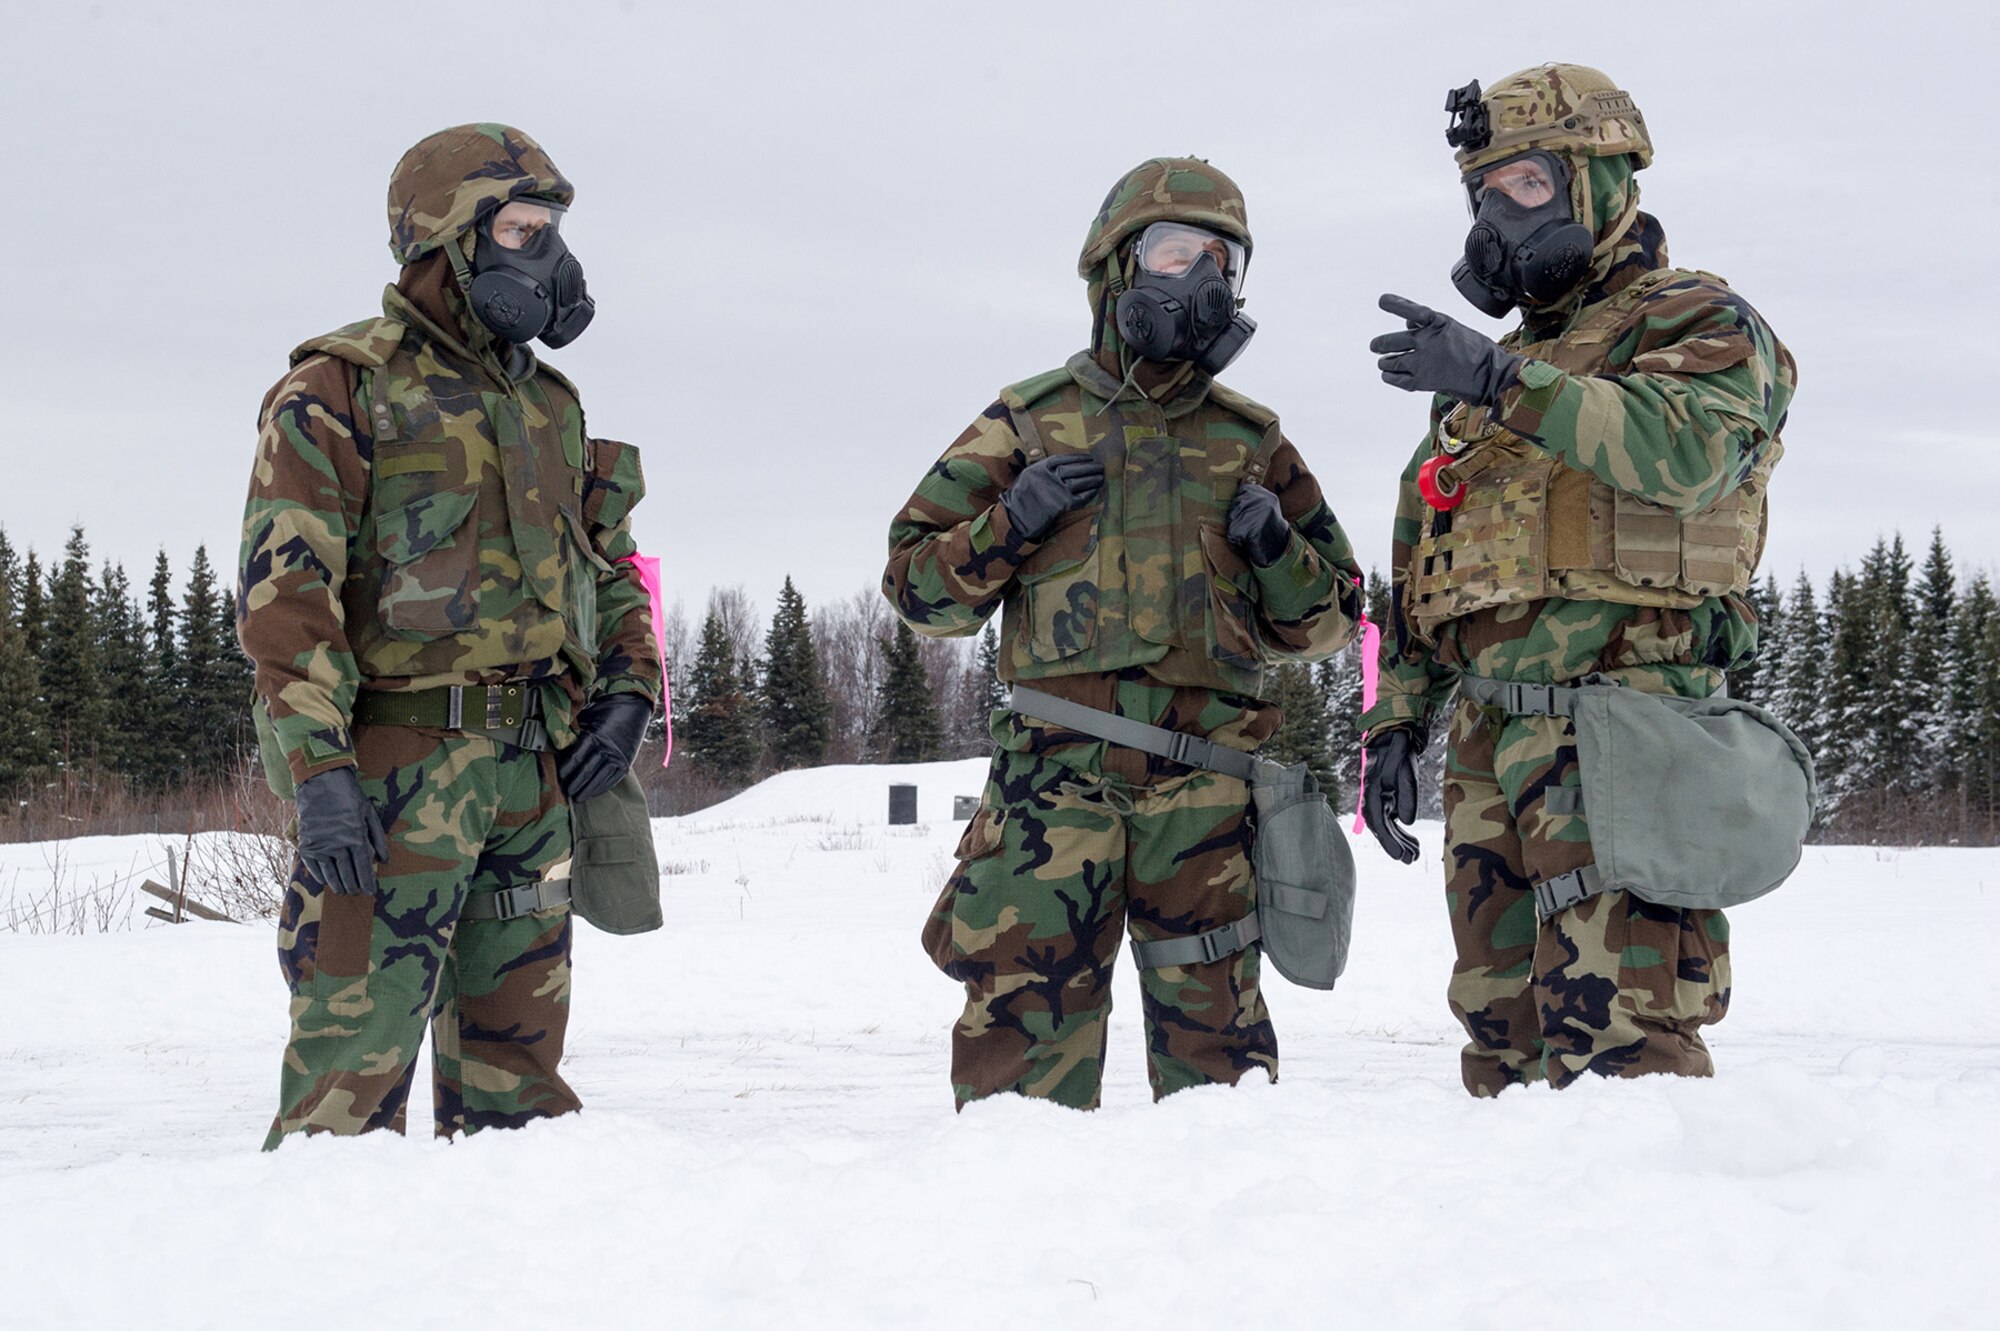 Airmen assigned to the 673d Civil Engineer Squadron, Explosives Ordinance Disposal Flight, observe preparations for a live-fire demolitions exercise in Mission Oriented Protective Posture 4 on Joint Base Elmendorf-Richardson, Alaska, Feb.14, 2018.  The Airmen were conducting EOD training in a simulated chemical weapons contaminated environment.